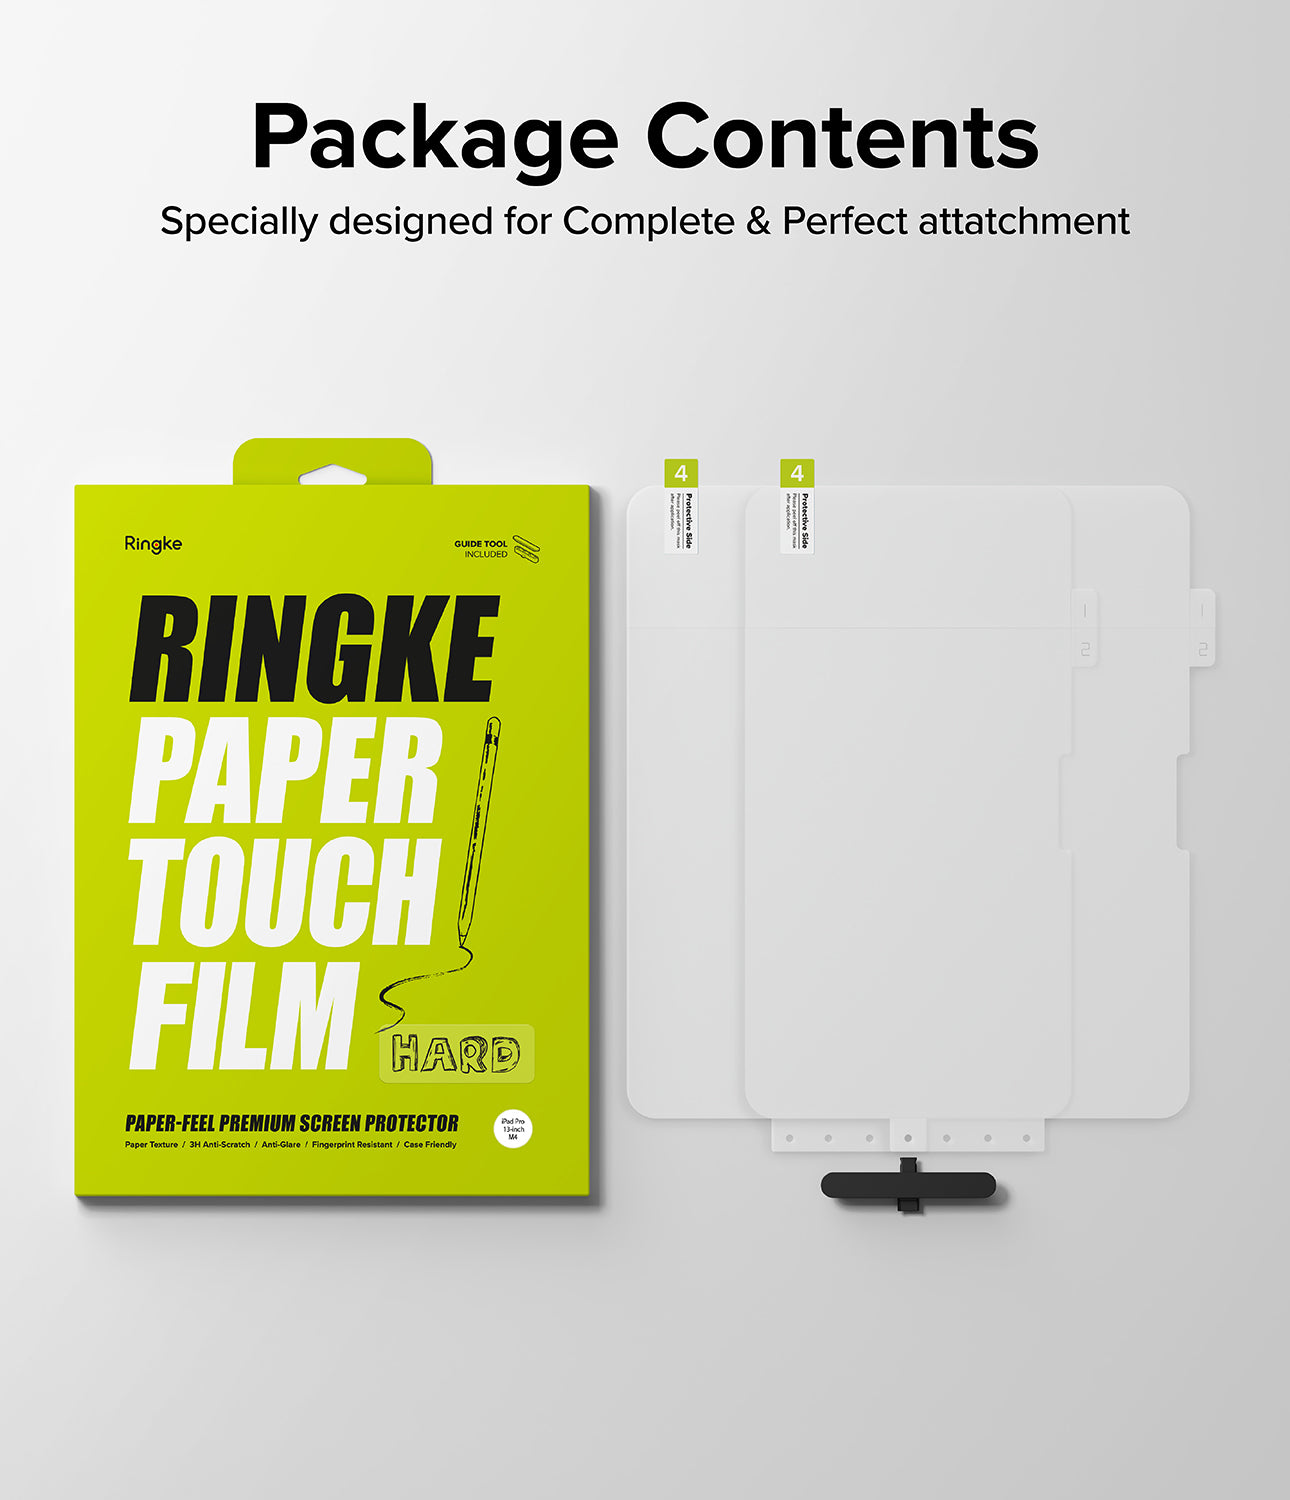 iPad Pro 13" (M4) Screen Protector | Paper Touch Film - Hard - Package Contents. Specially designed for Complete and Perfect attachment.